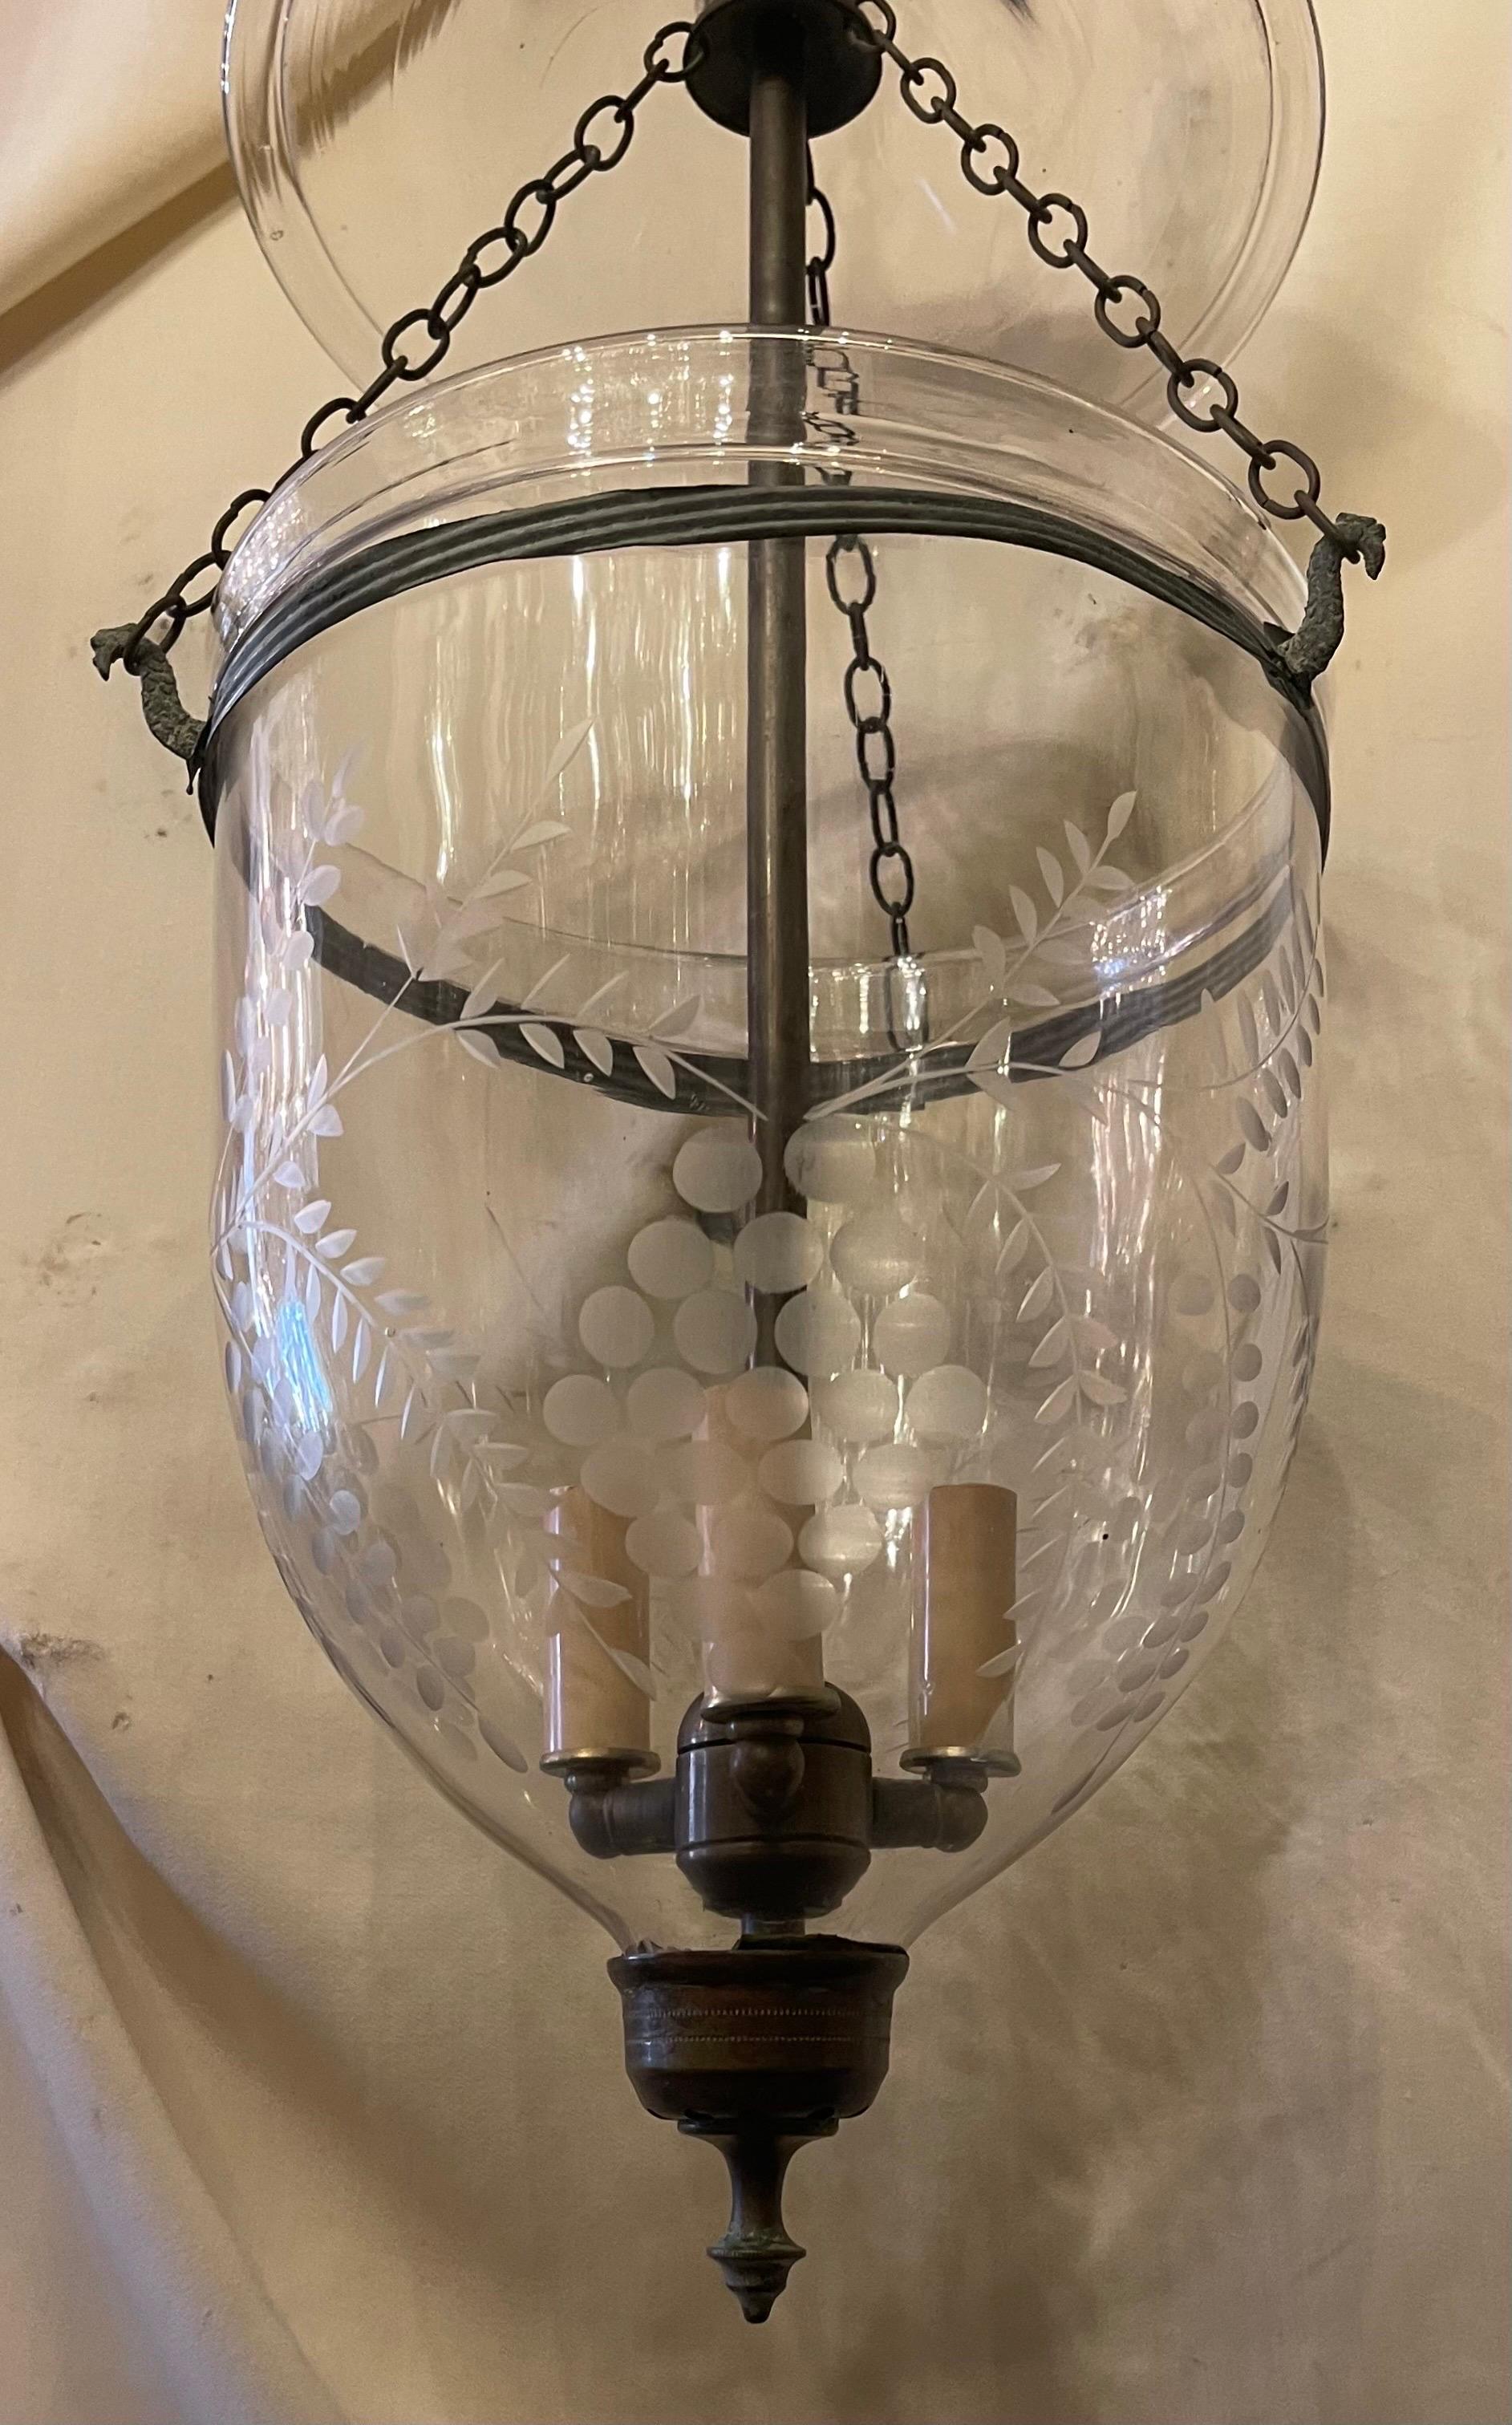 A Vintage Etched Glass Leaves Grape Vine Pattern Bell Jar Lantern With Oxidized Brass Hardware, In The Manner Of Vaughan This Fixture Has 3 Candelabra Internal Lights And Comes Ready To Install With Chain Canopy And Mounting Hardware.